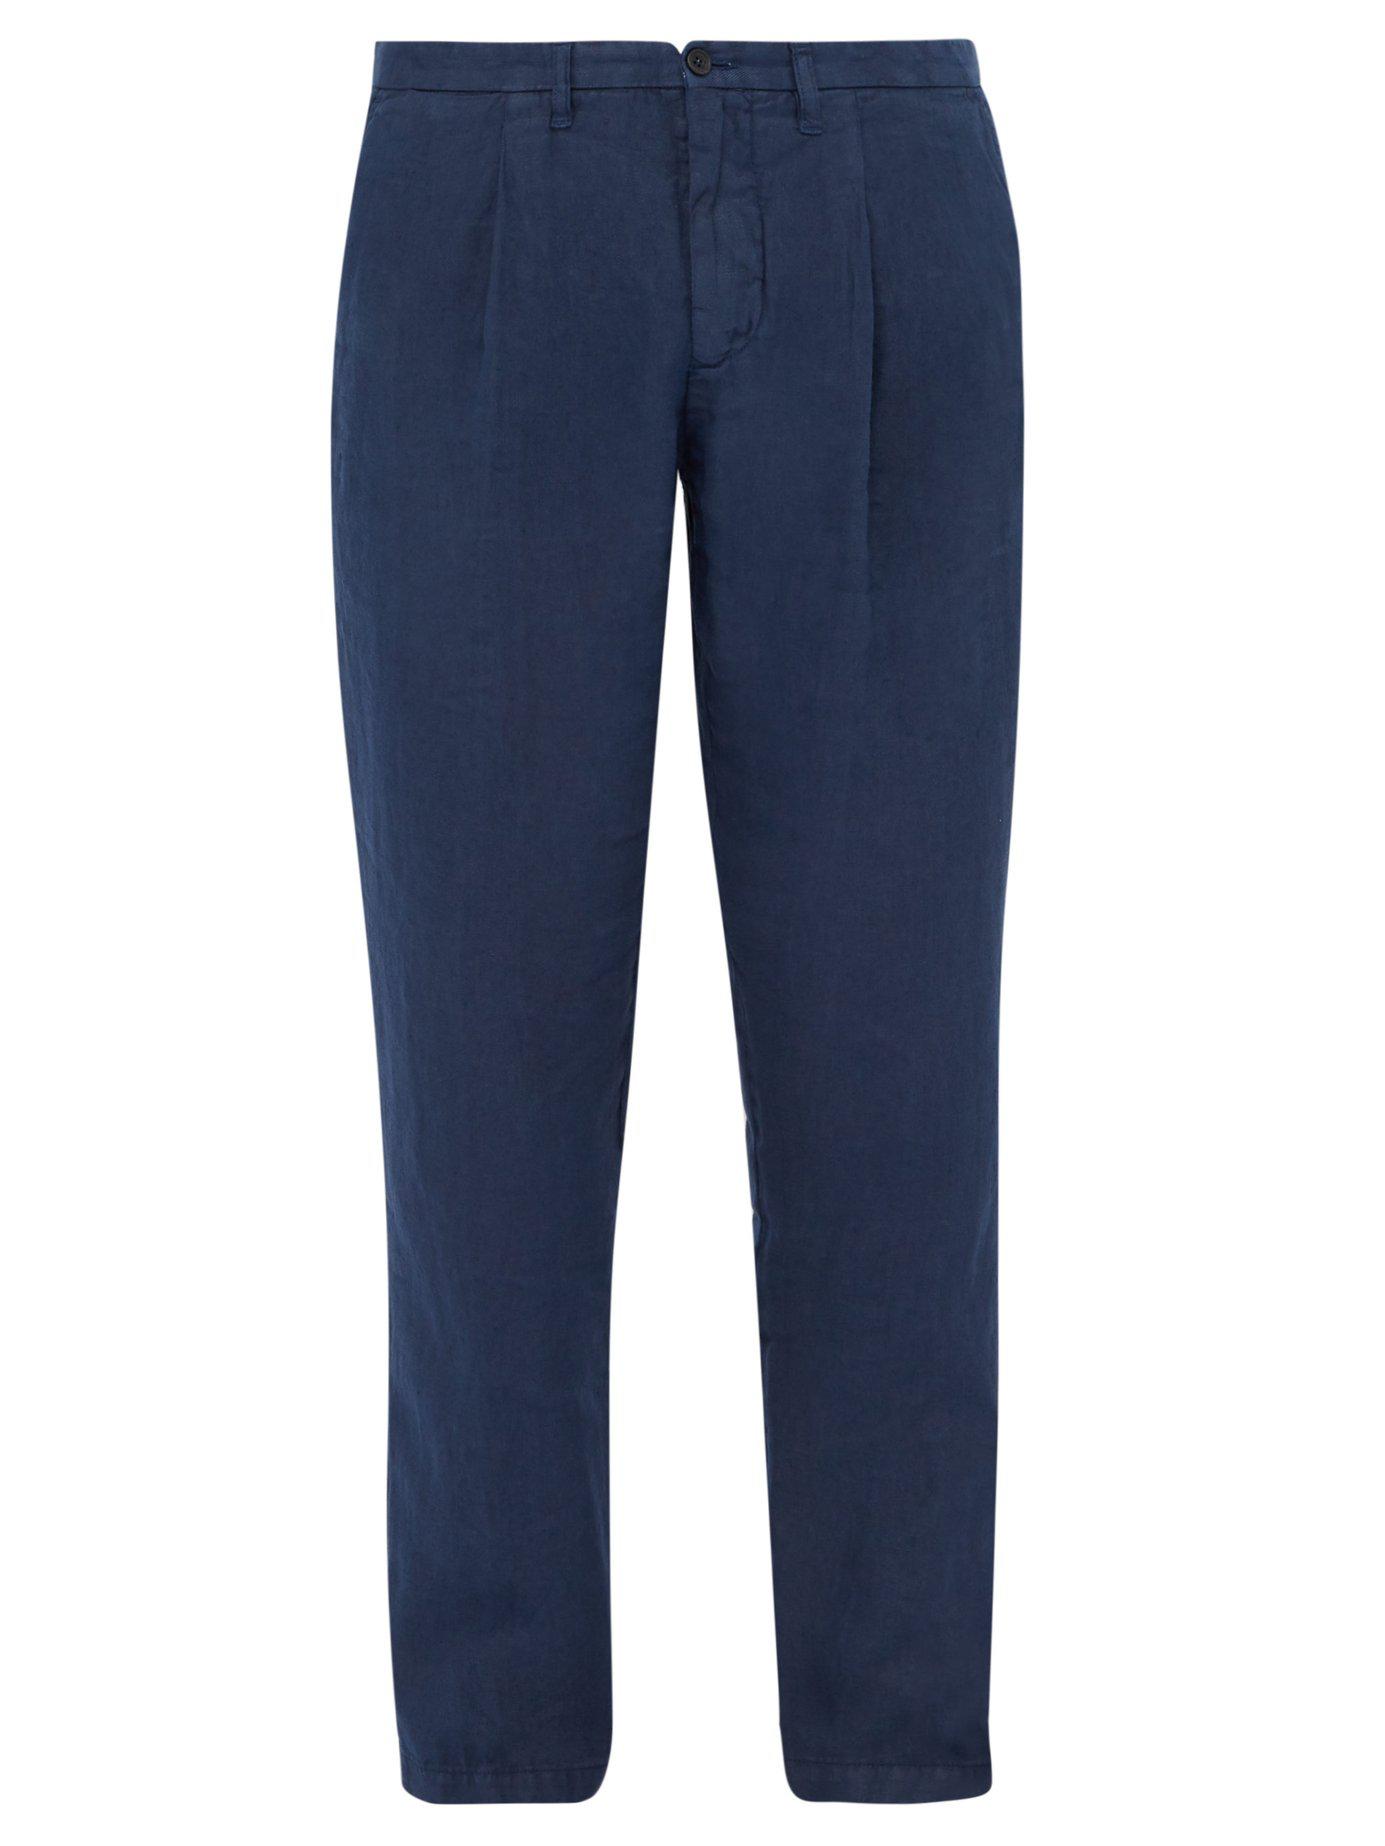 120% Lino Mid Rise Linen Trousers in Blue for Men - Lyst